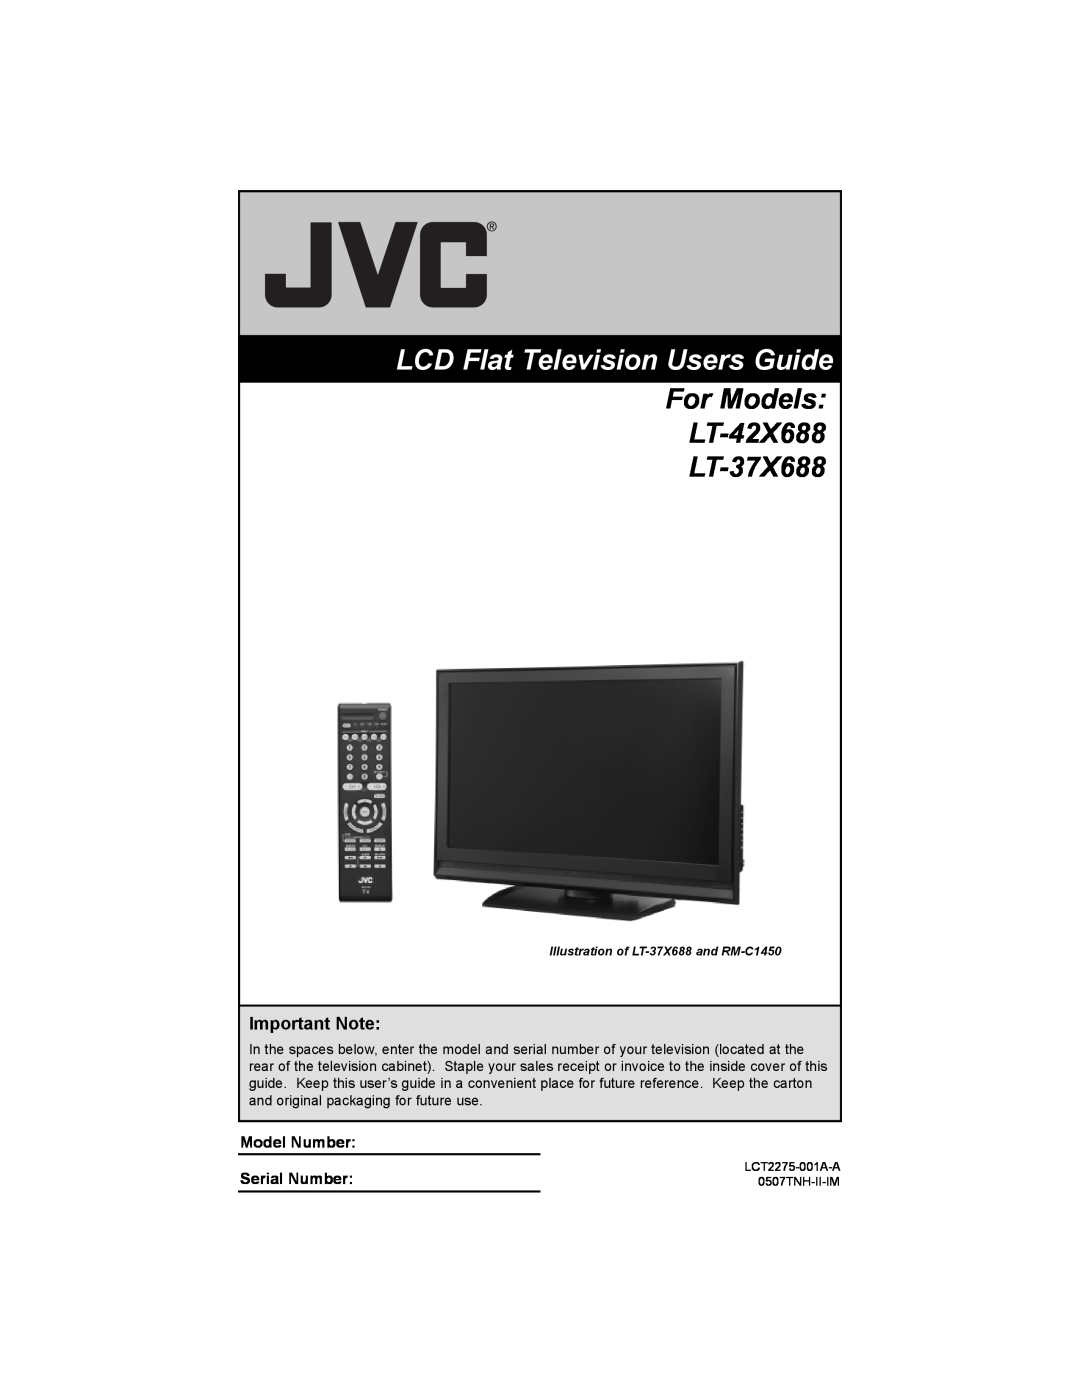 JVC LT-37X688, LT-42X688 manual Important Note, Model Number Serial Number, LCD Flat Television Users Guide 